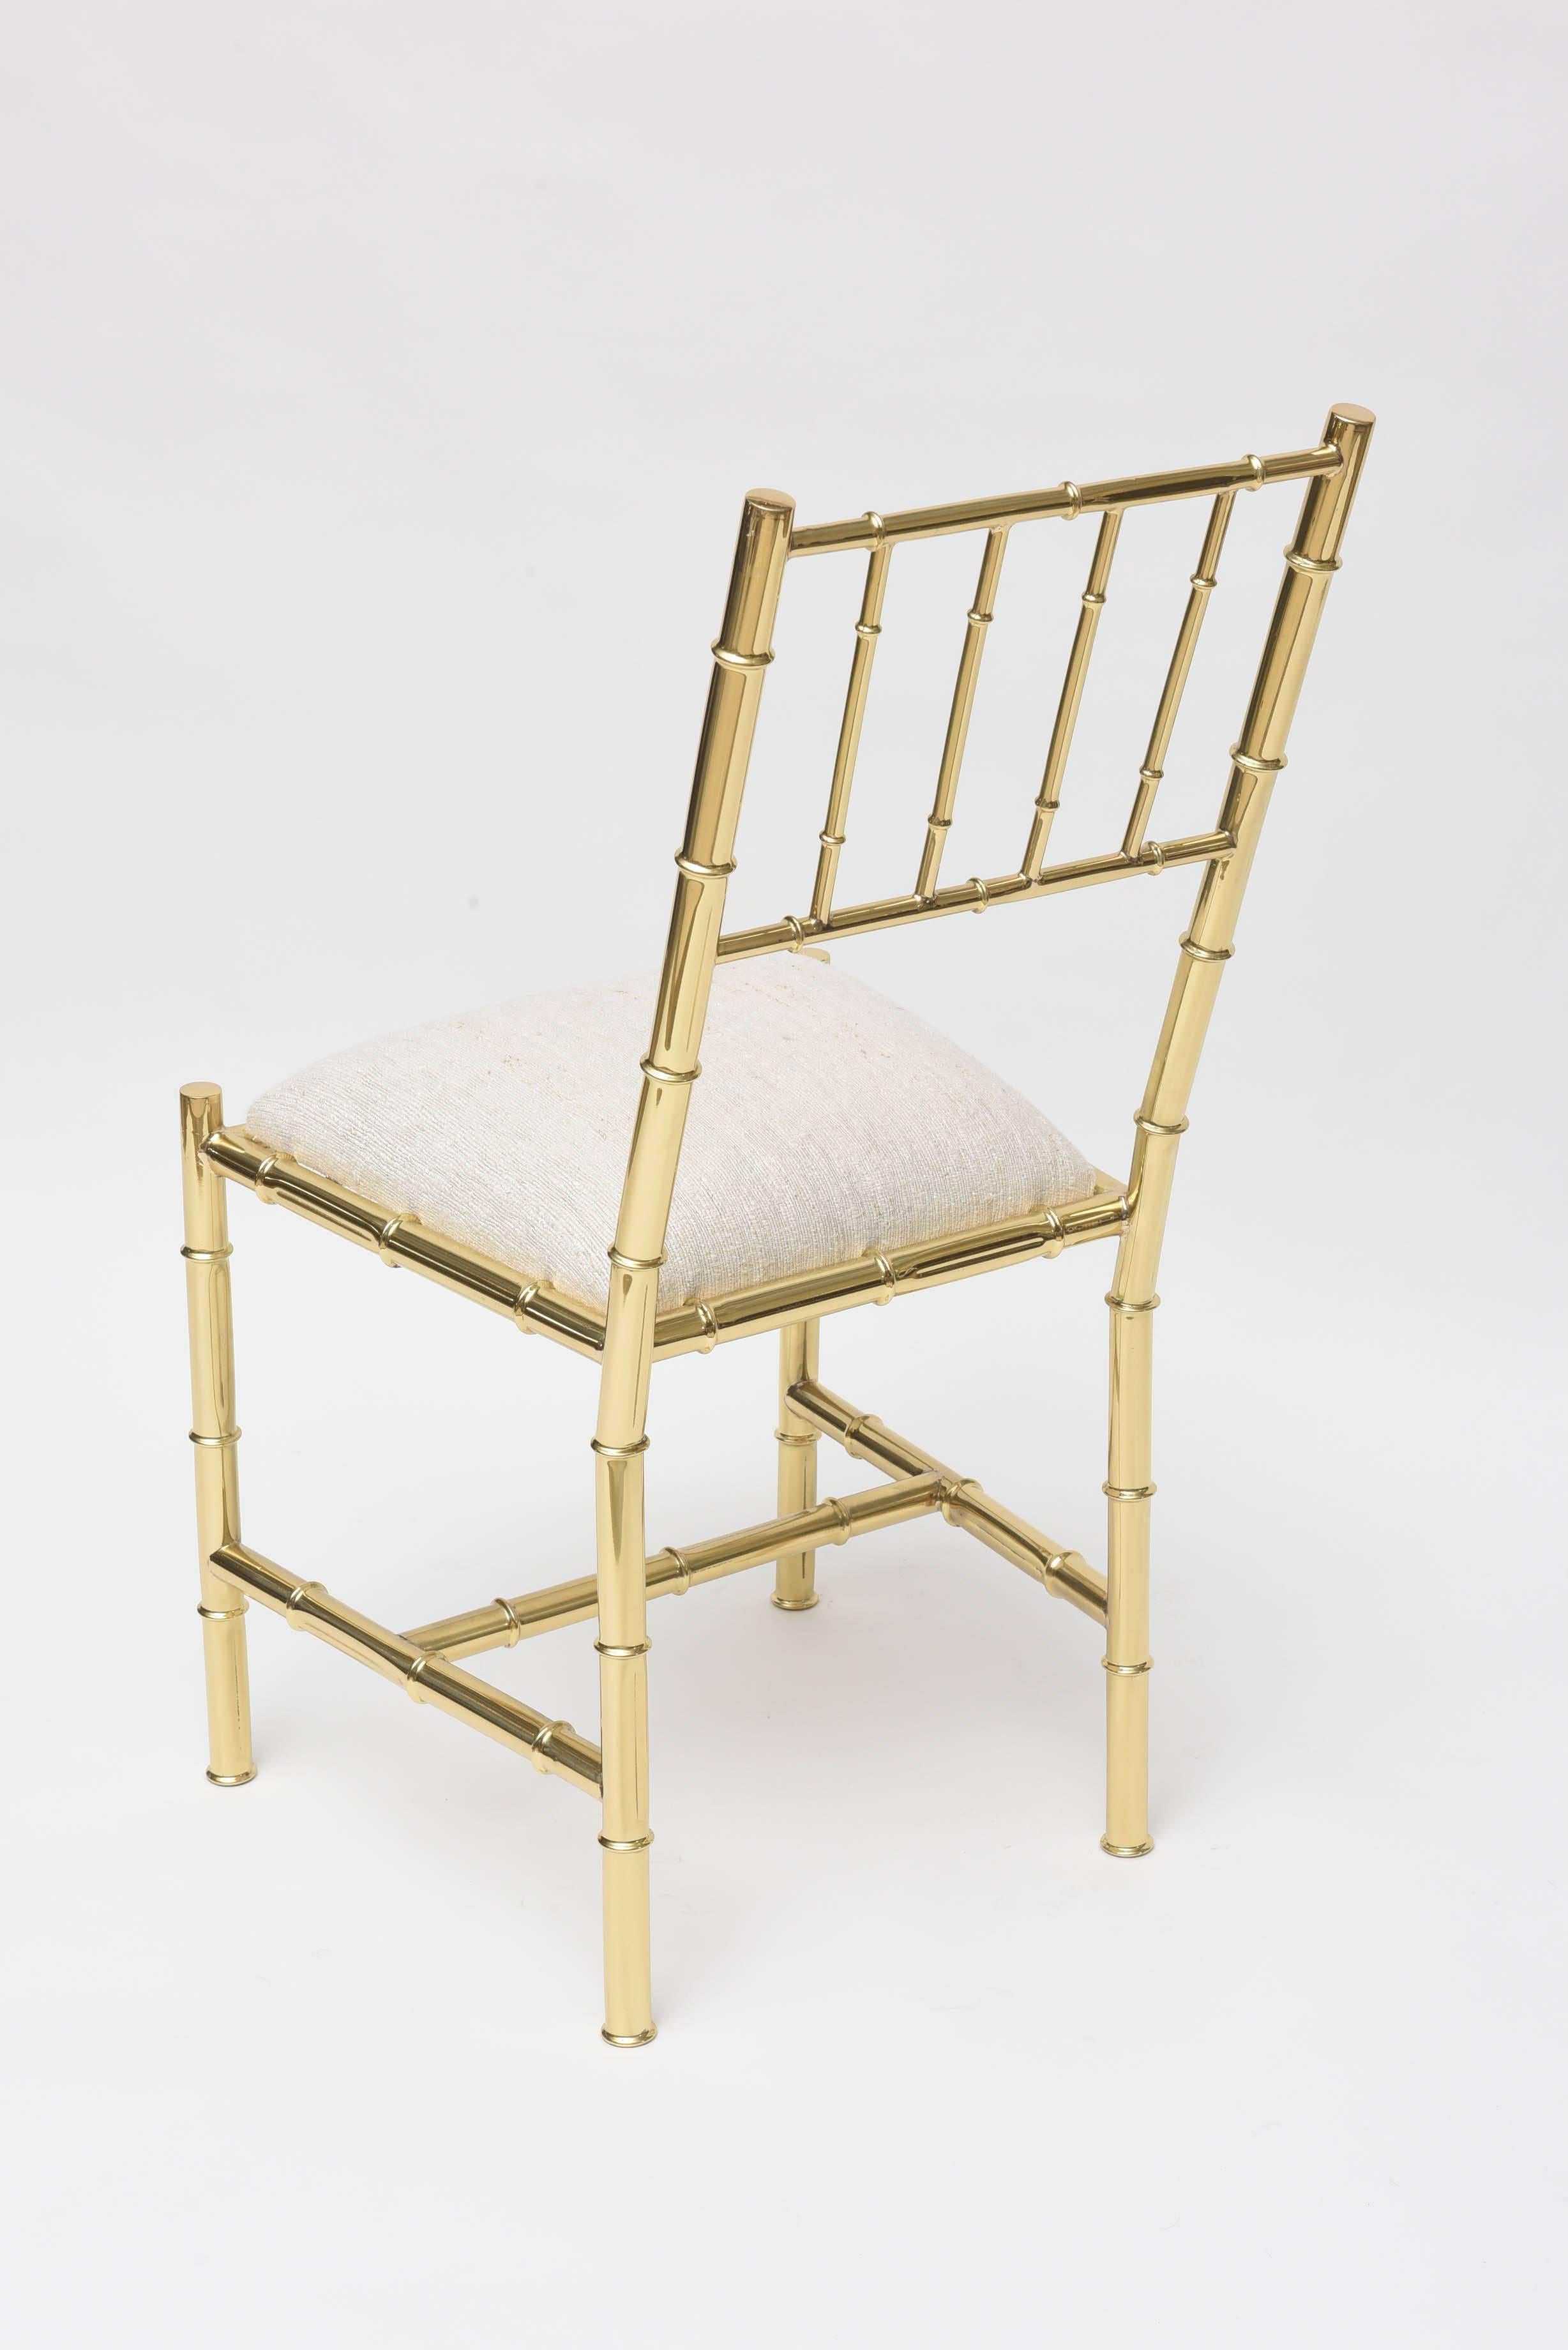 Italian Faux Bamboo Chair in Polished Brass 1